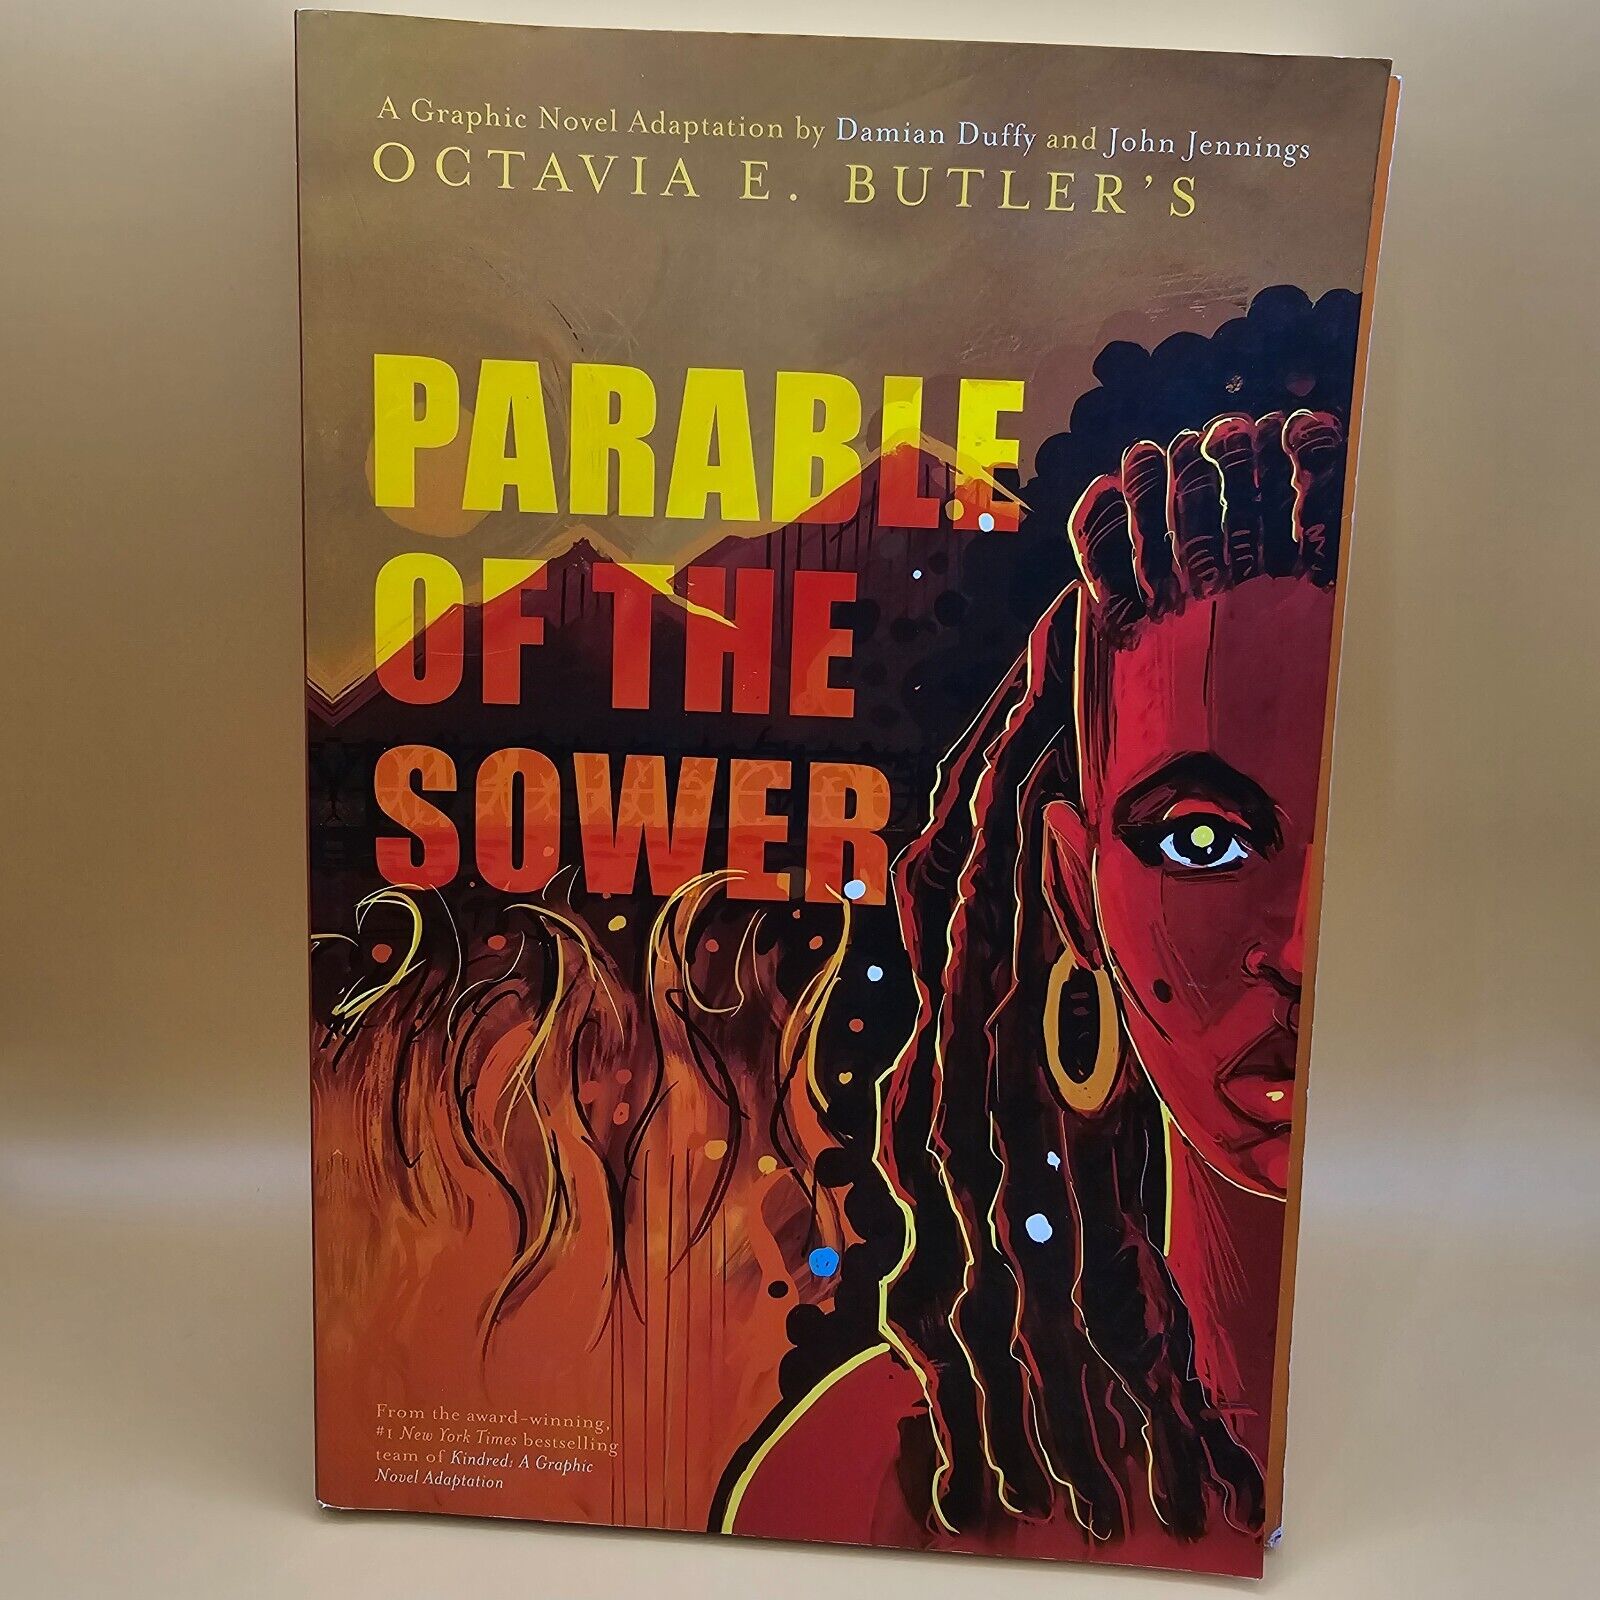 Parable of the Sower: A Graphic Novel Adaptation - Paperback